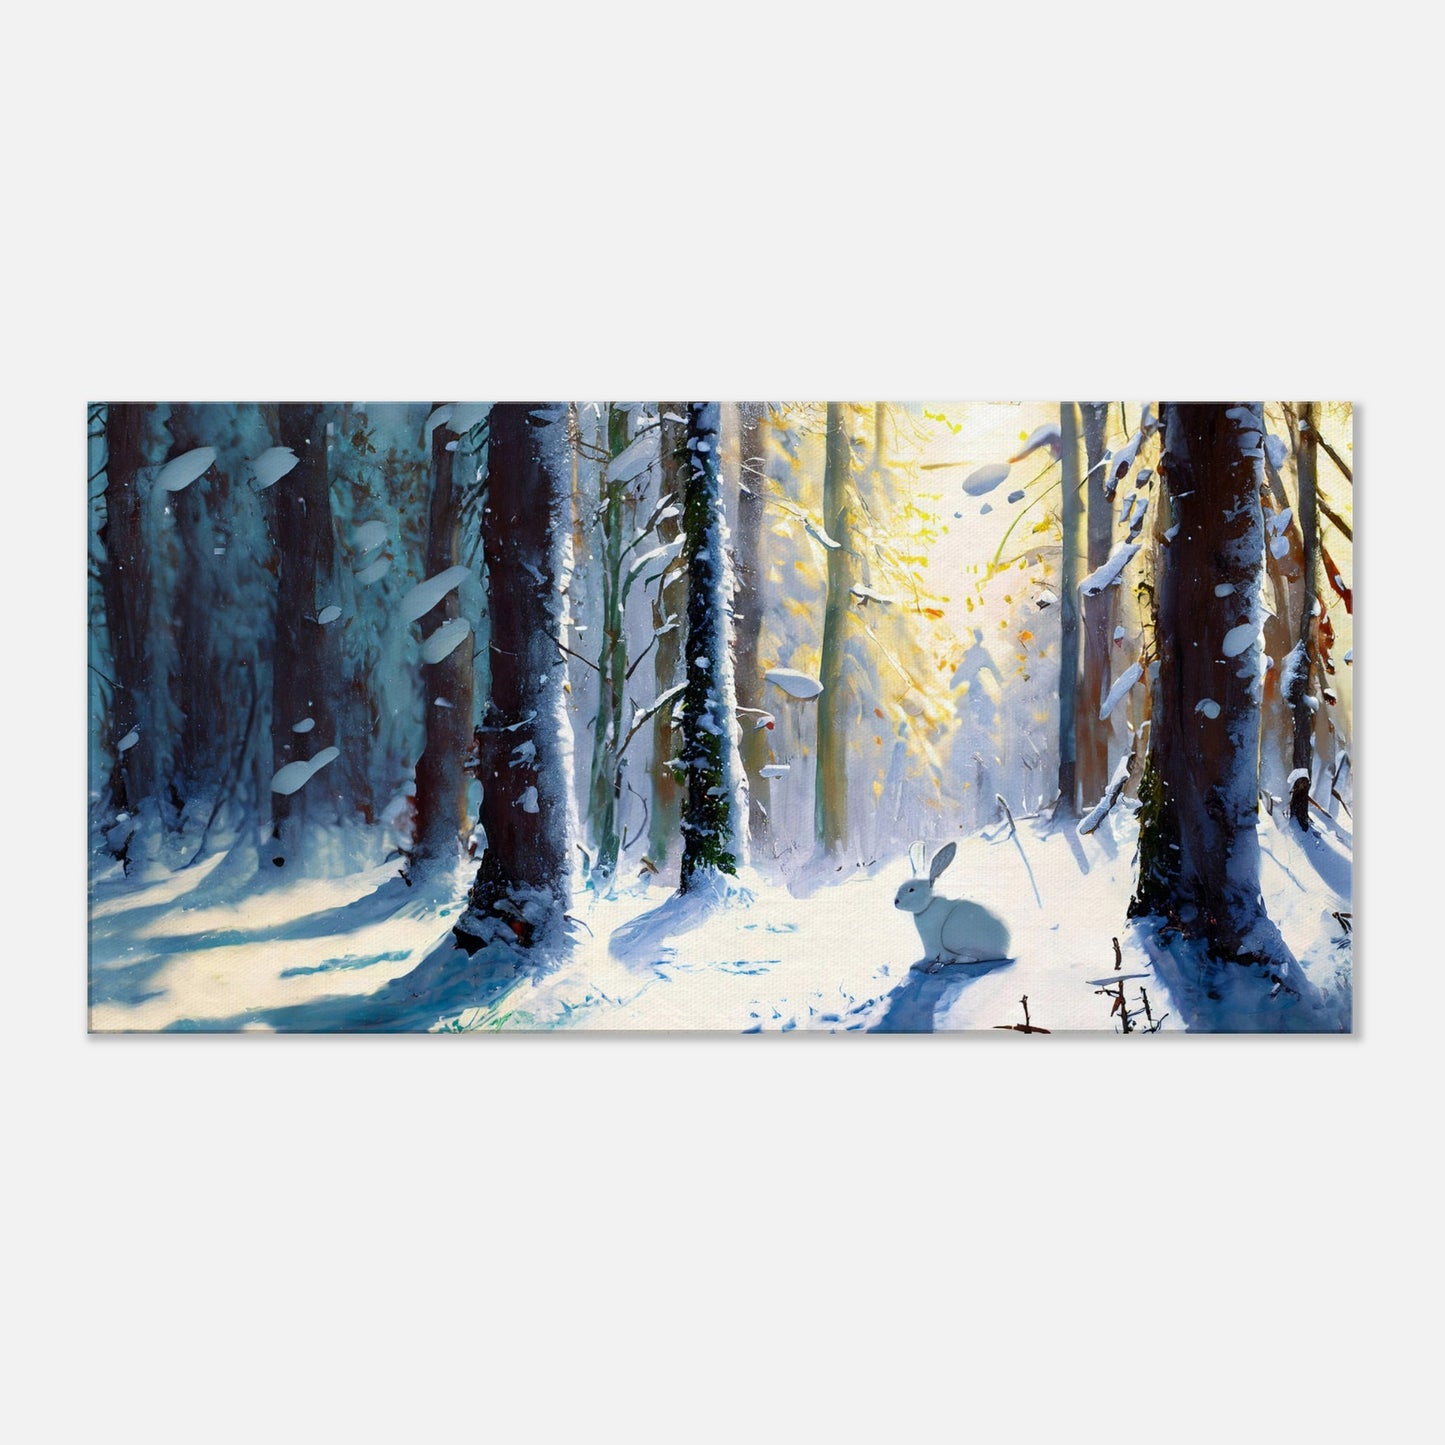 Winter forest with rabbit on canvas print abstract art By Posterity design 50X100cm - Posterify